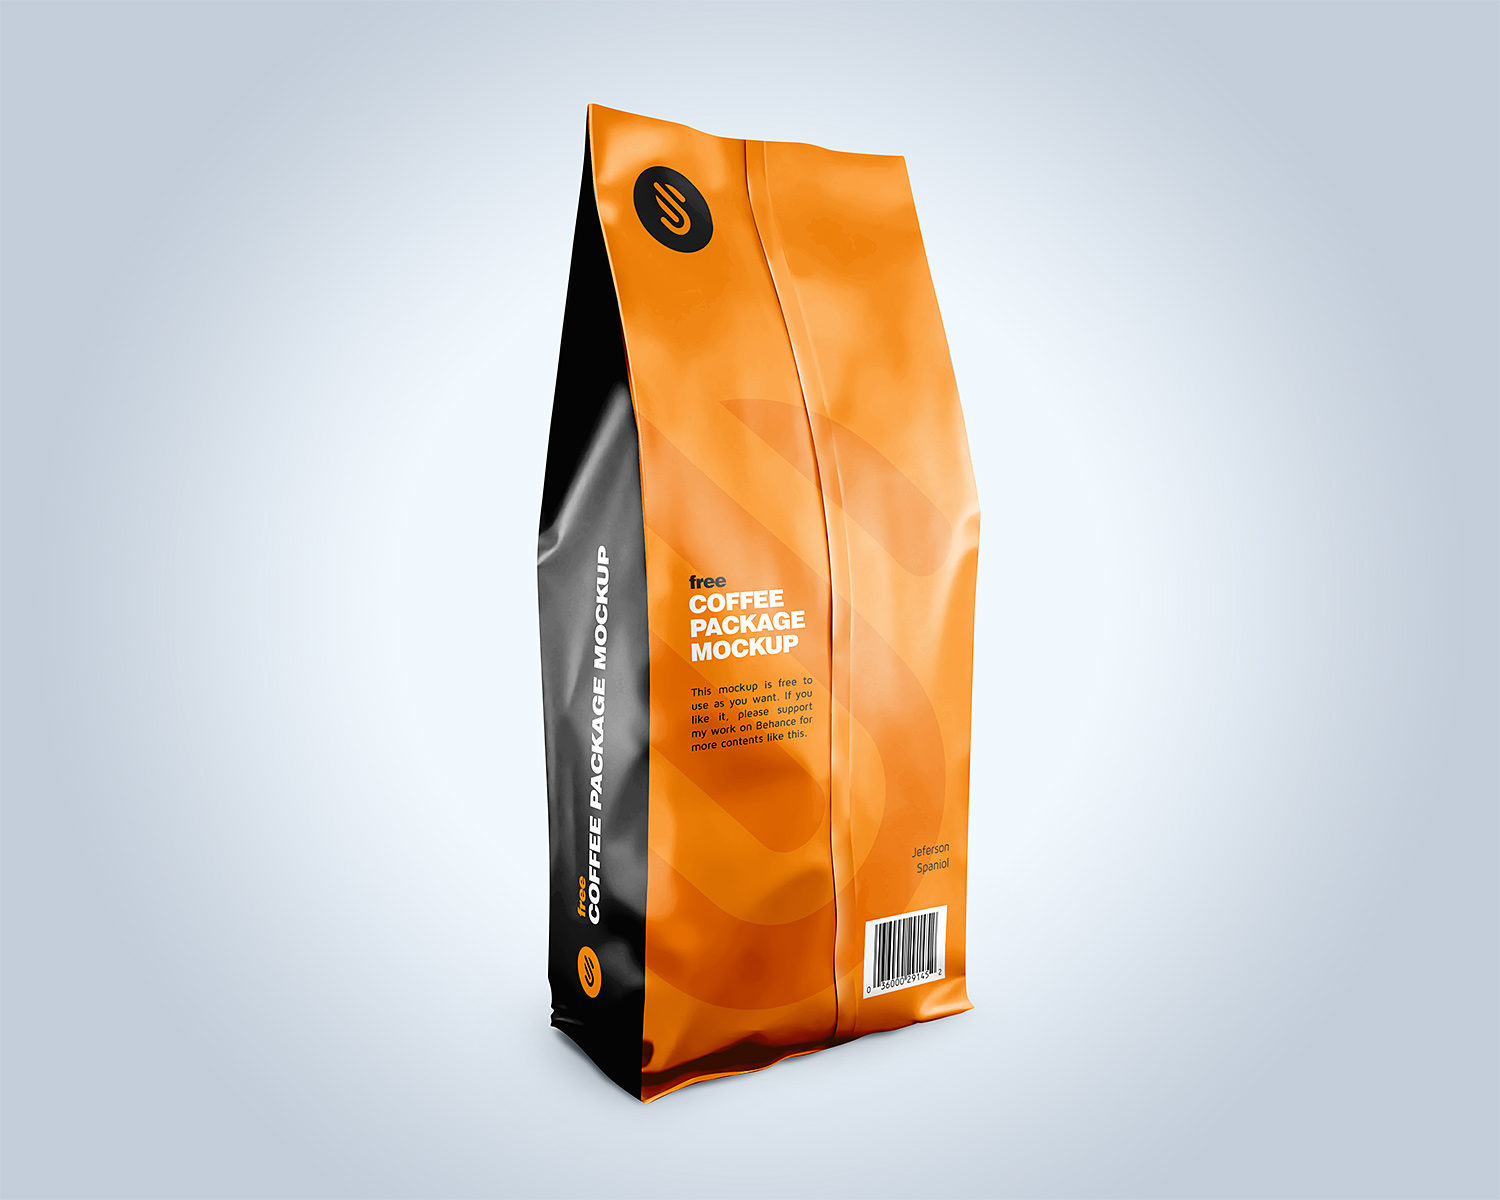 Free Coffee Pouch Packaging Mockup